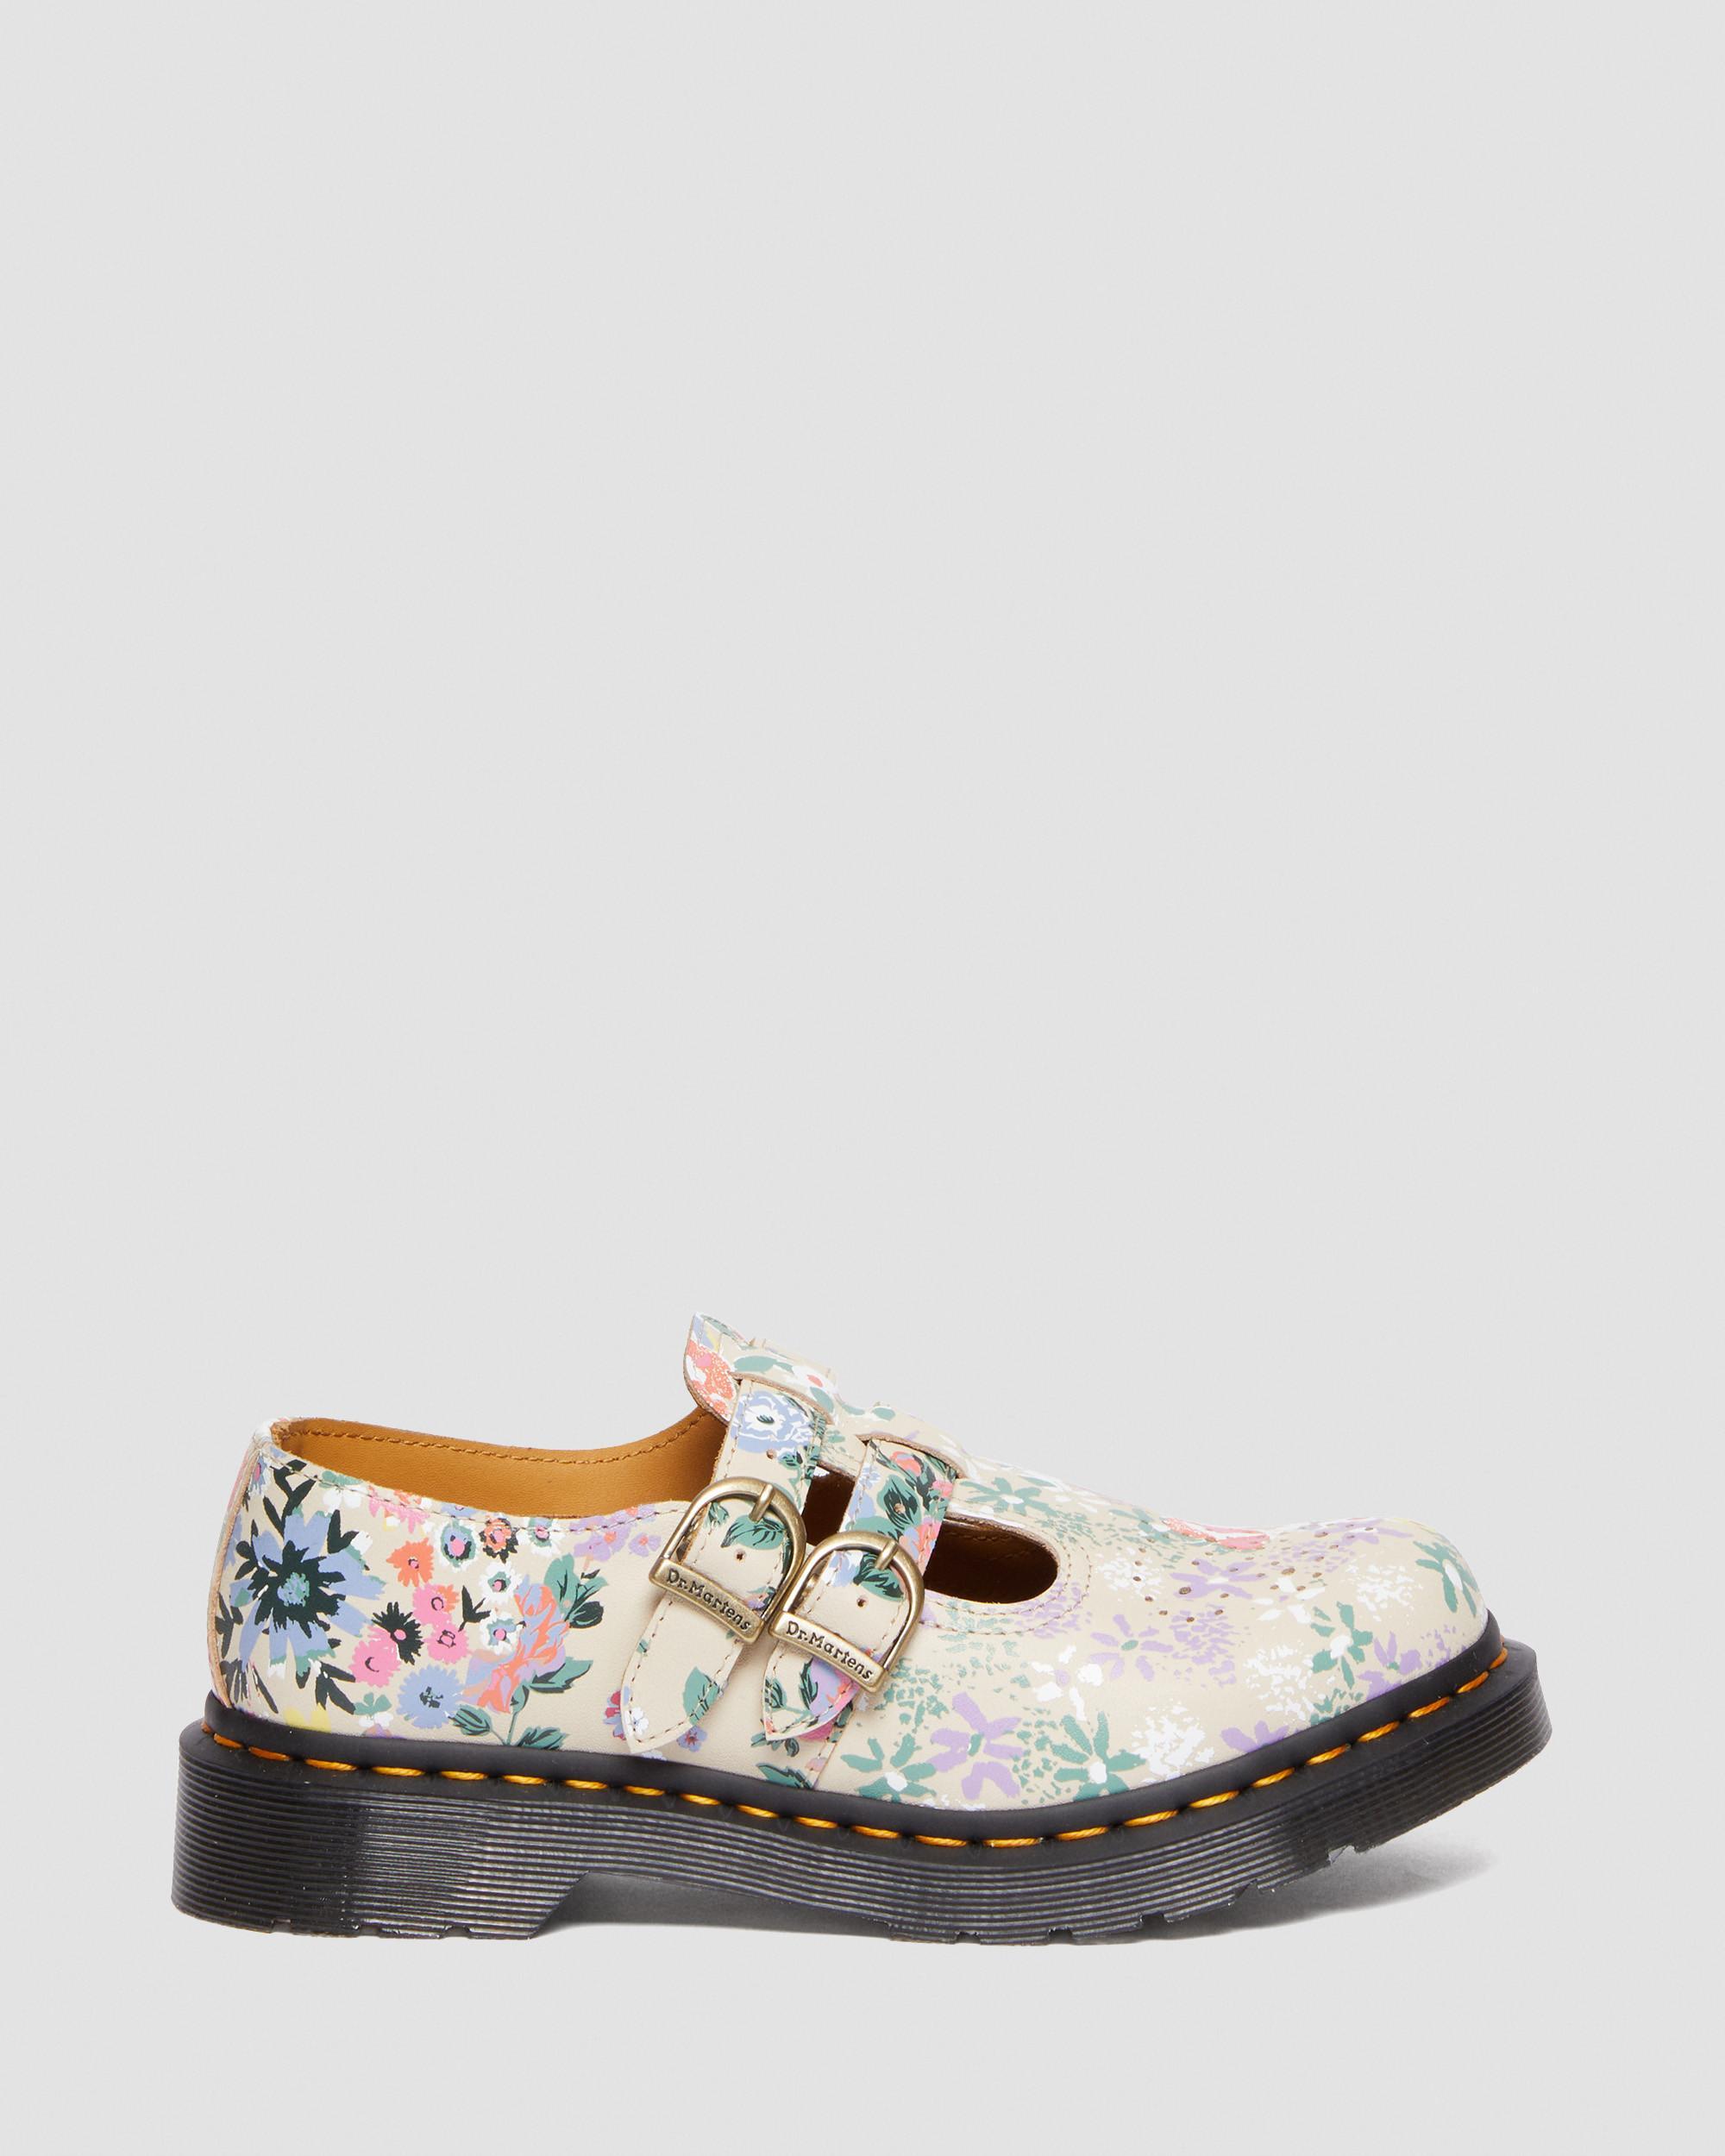 Dr. Martens 8065 Floral Mash Up Leather Mary Jane Shoes in White | Lyst